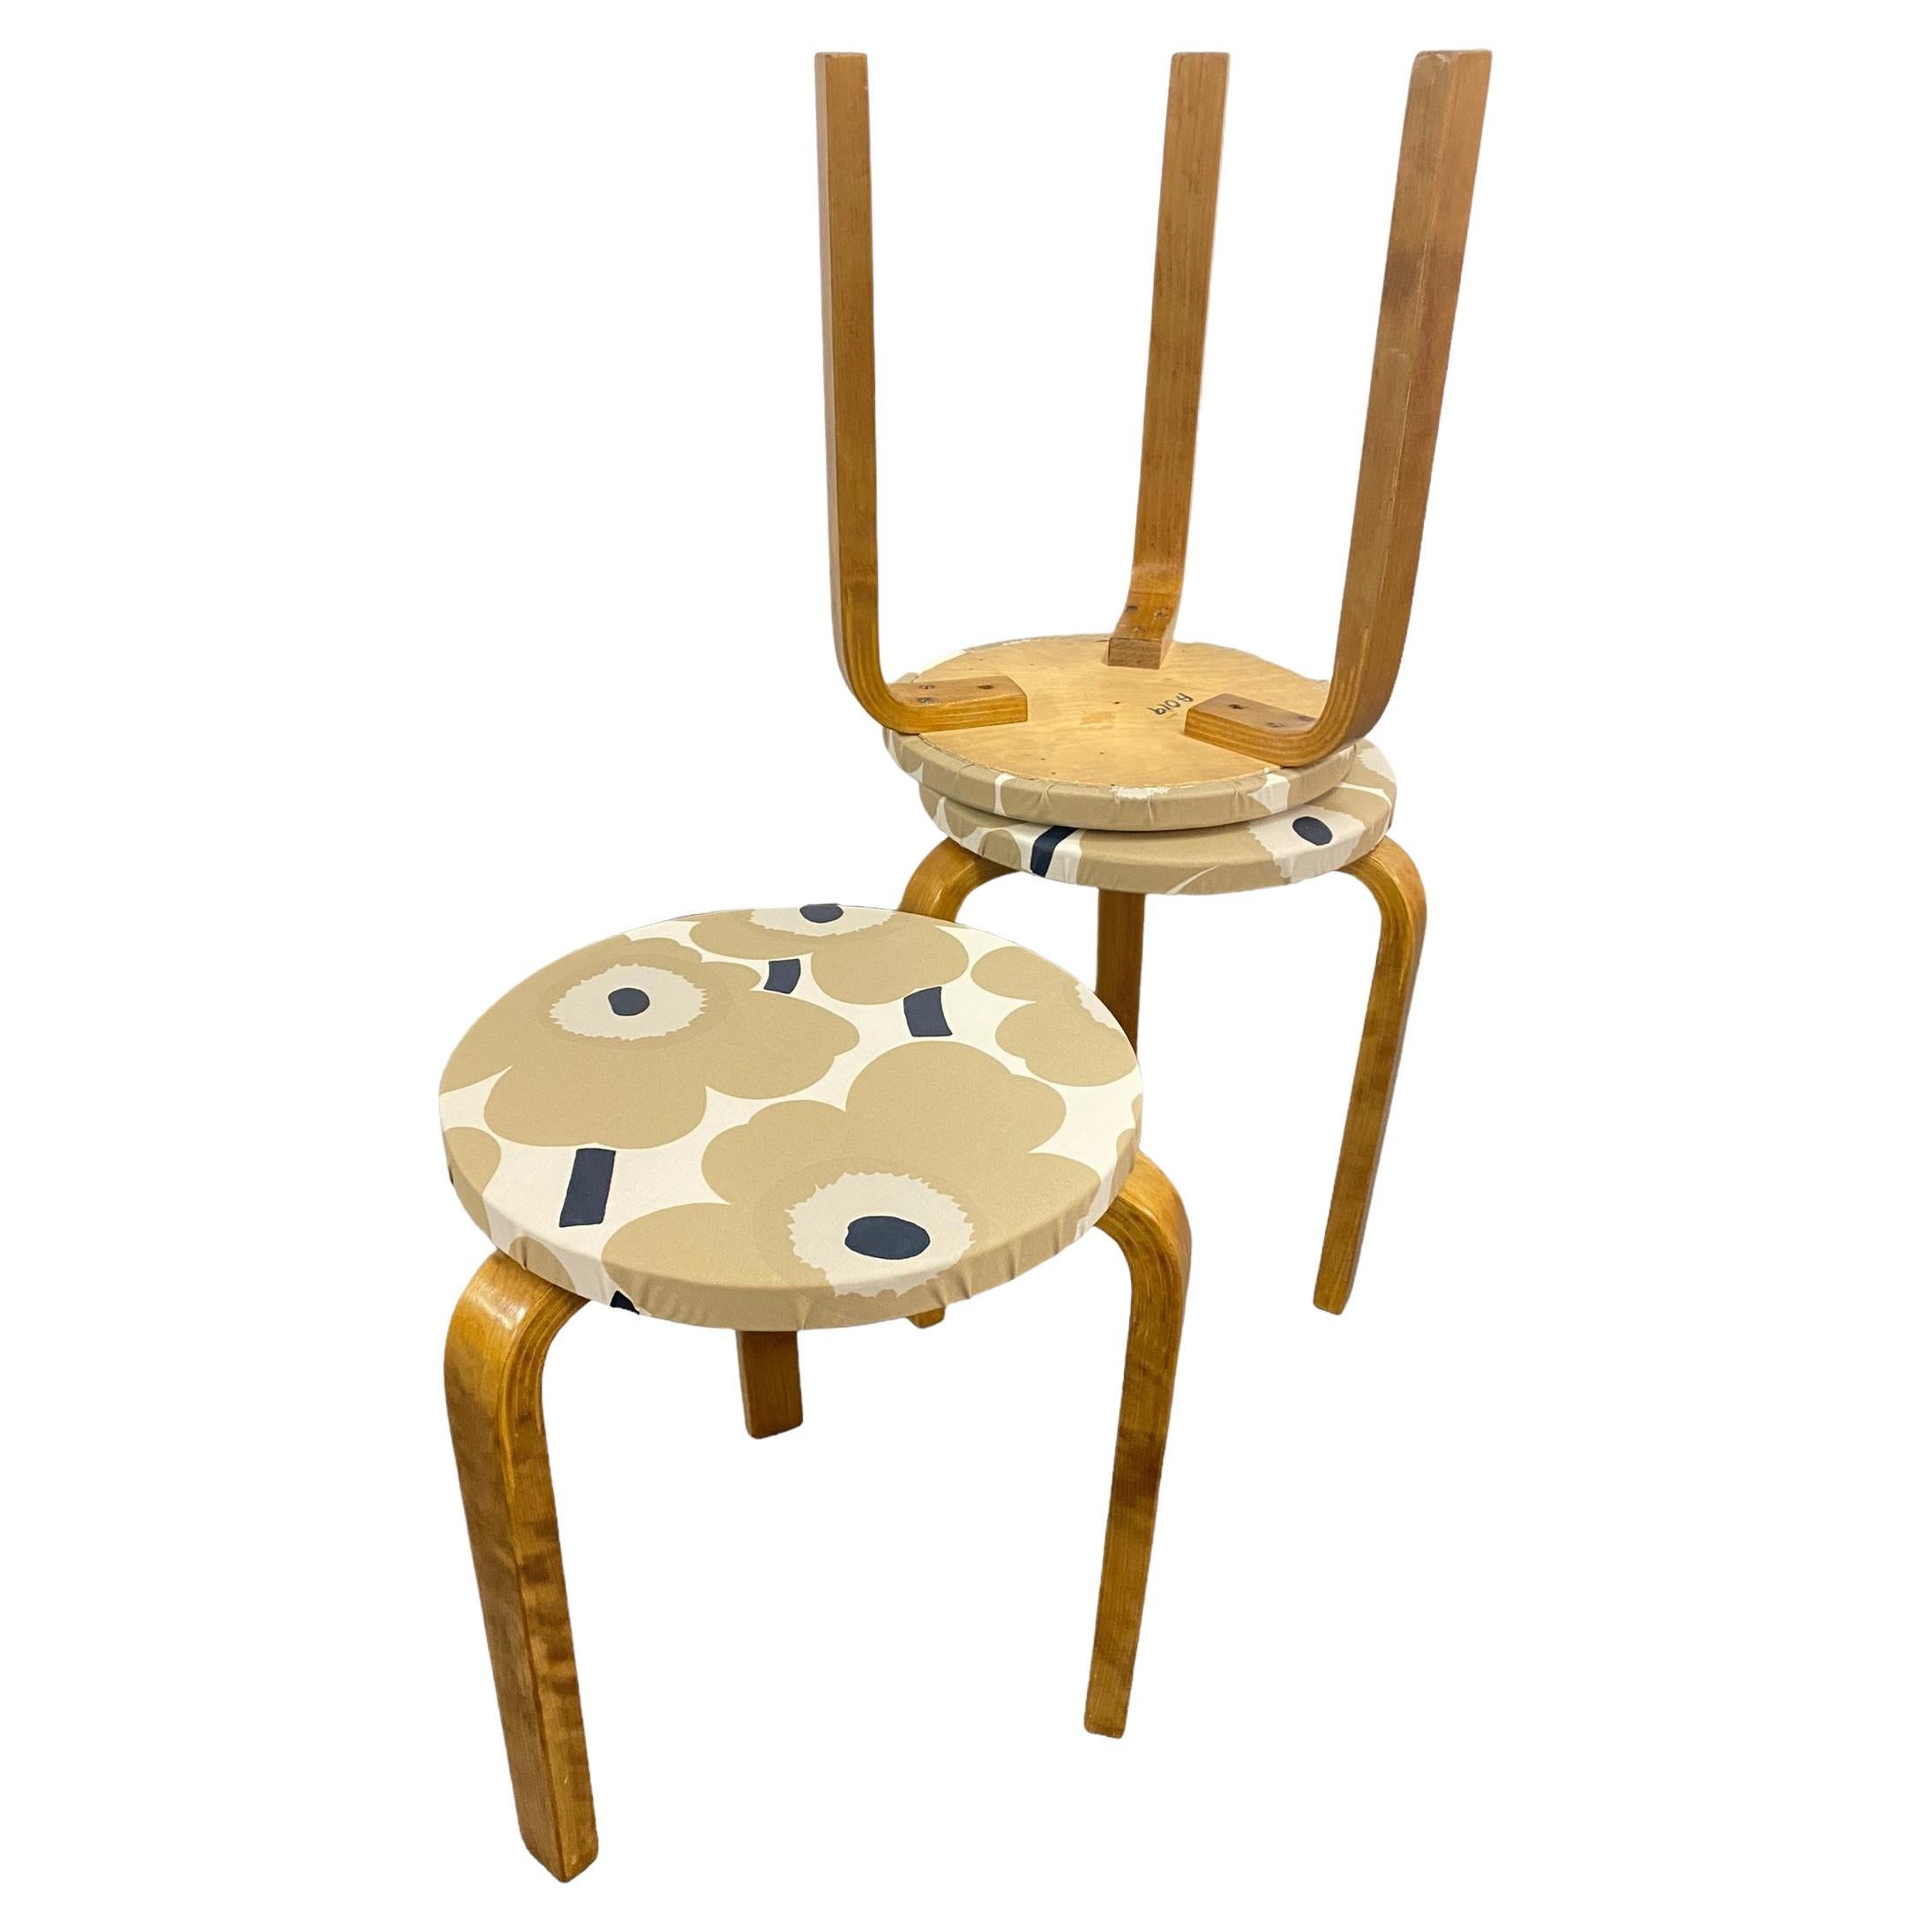 These three Alvar Aalto iconic stools from 1930s are beautiful and space saving furniture pieces of timeless design. The legs are mounted directly to the underside of the round seat without the need for complicated connecting elements. The stools